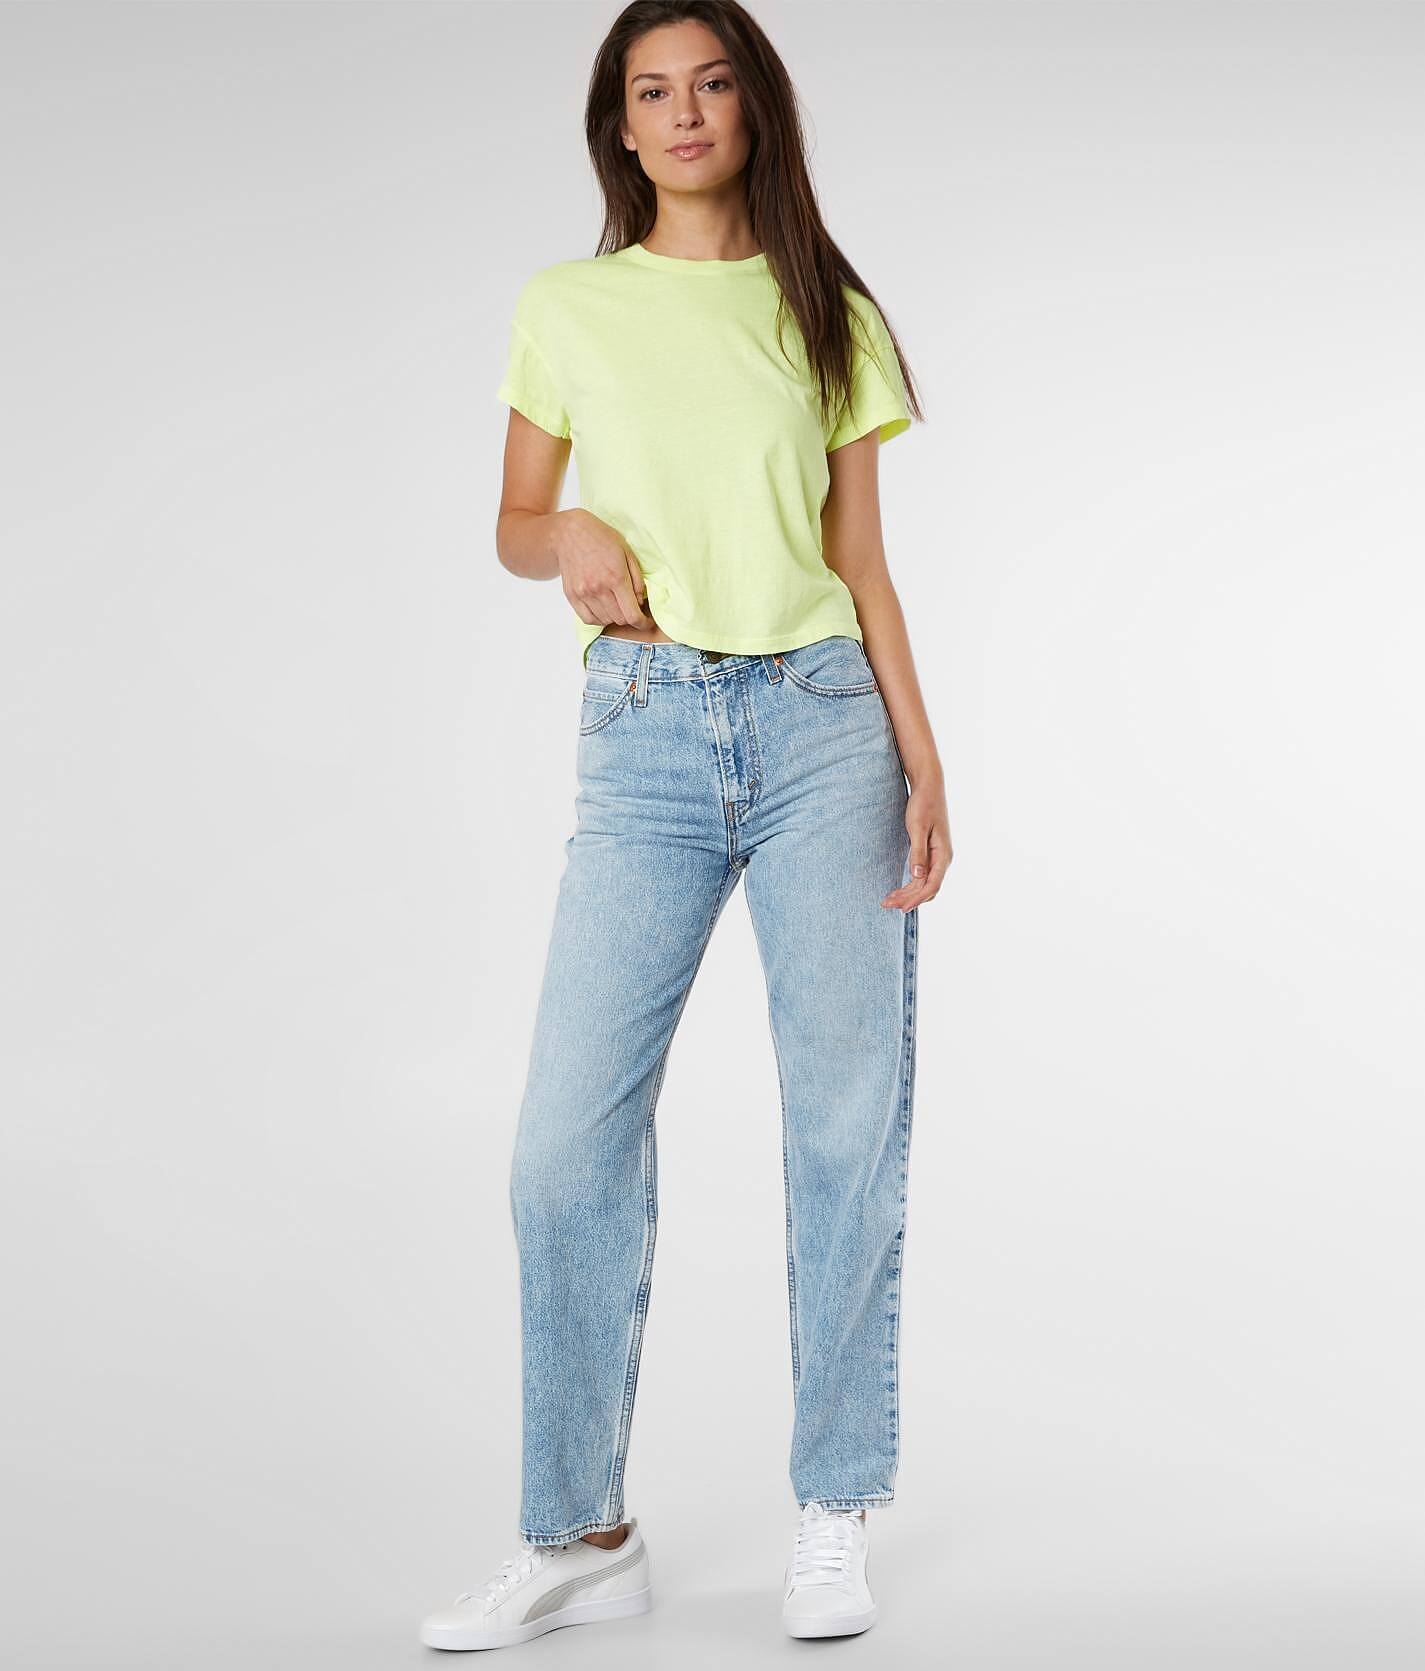 dad jeans womens